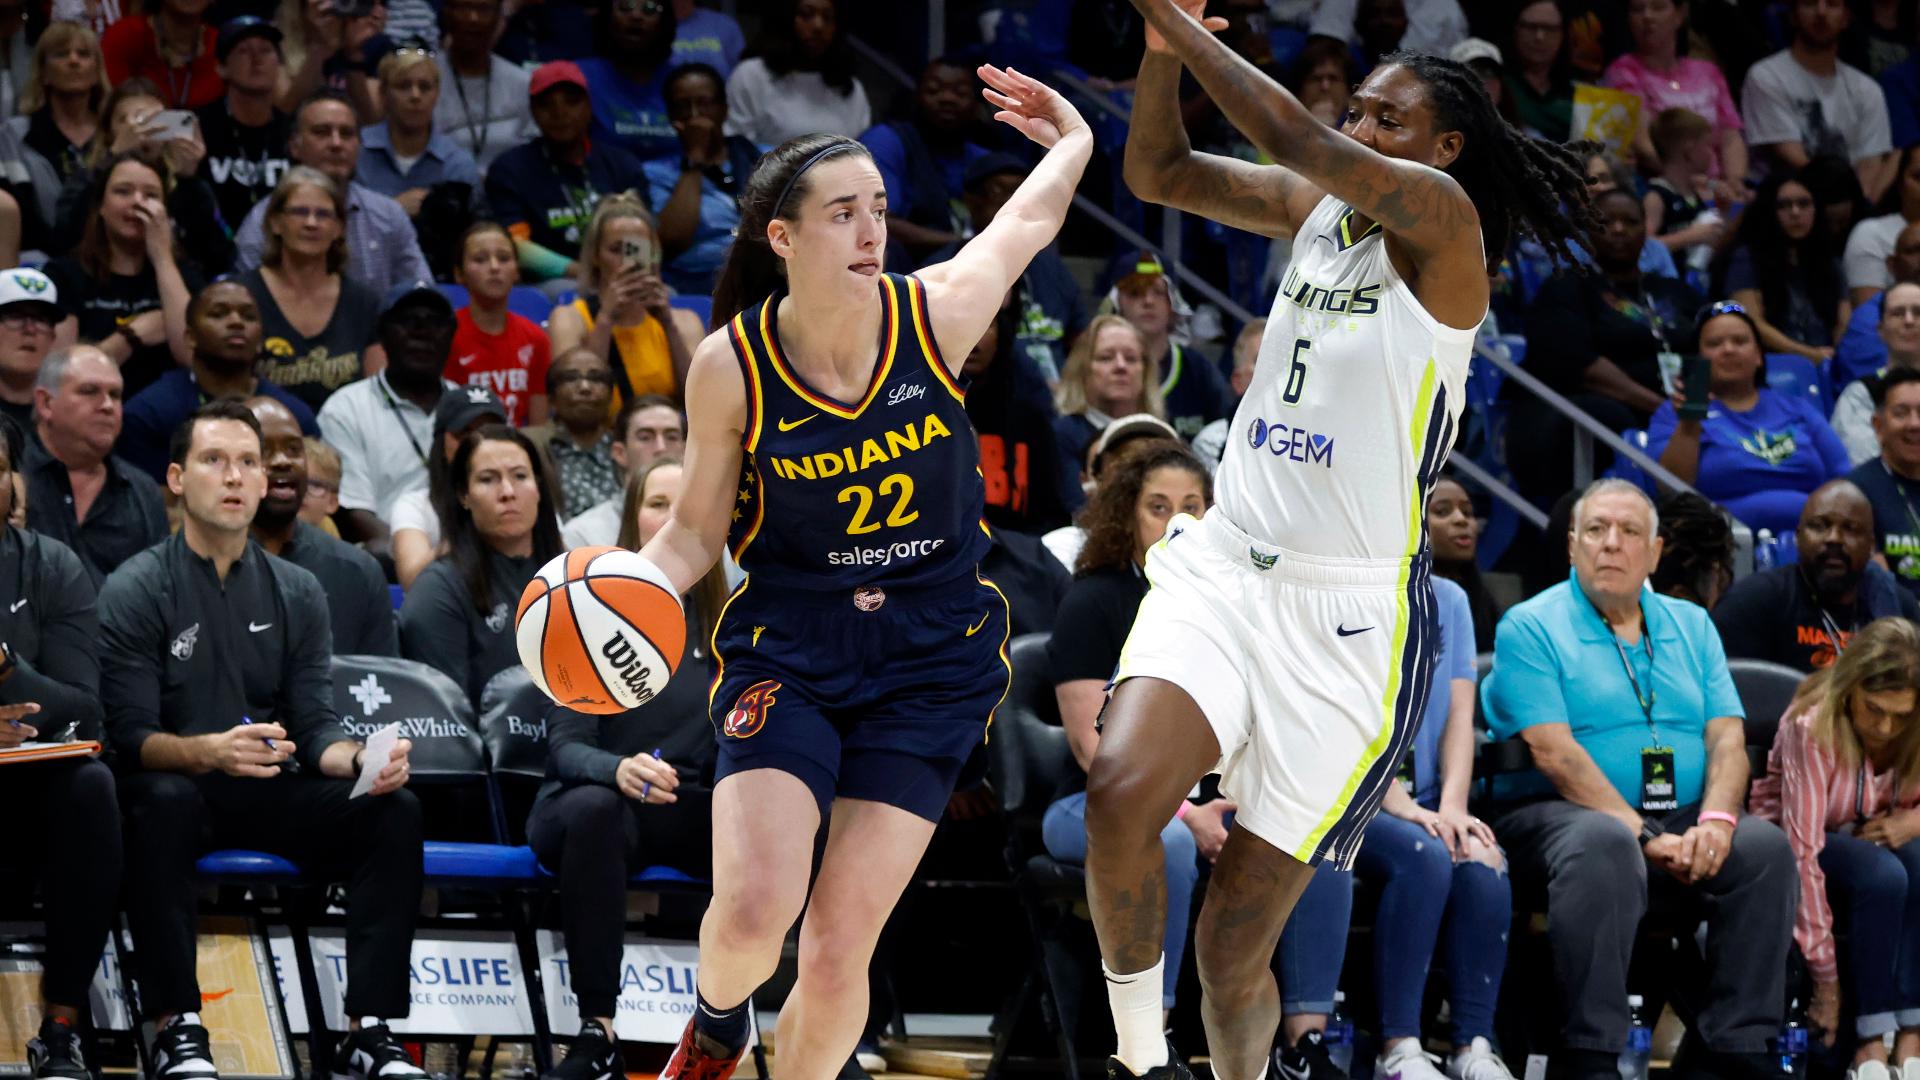 Caitlin Clark scored 16 points in the first half of her WNBA preseason debut in Dallas Friday night.